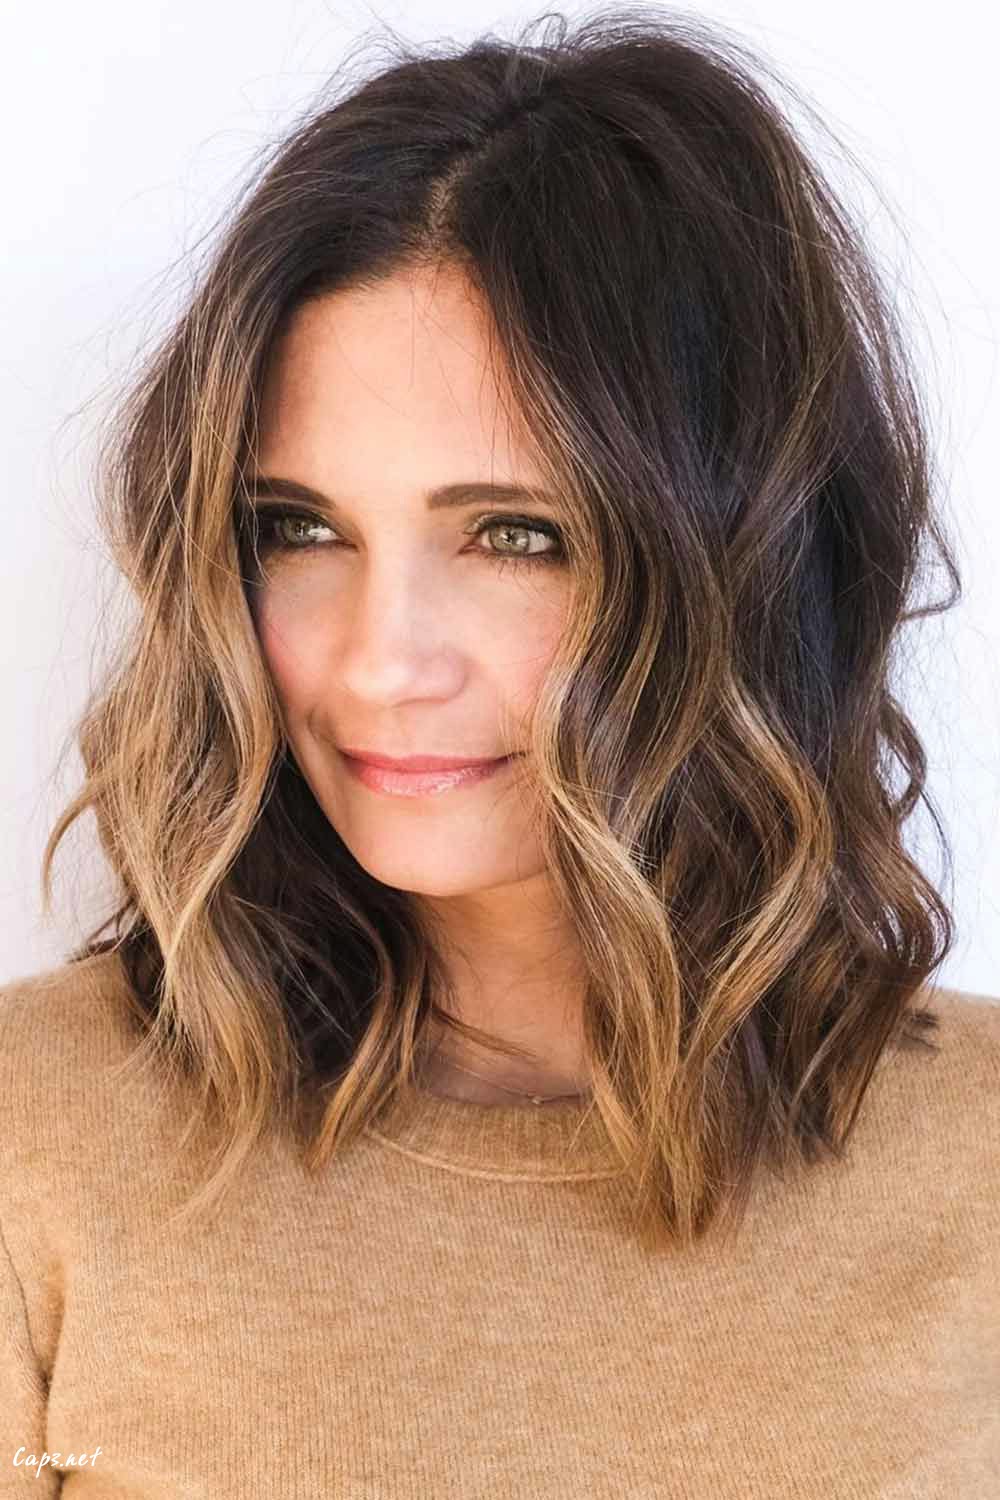 hairstyles for women over 50 new style wavy messy side styling